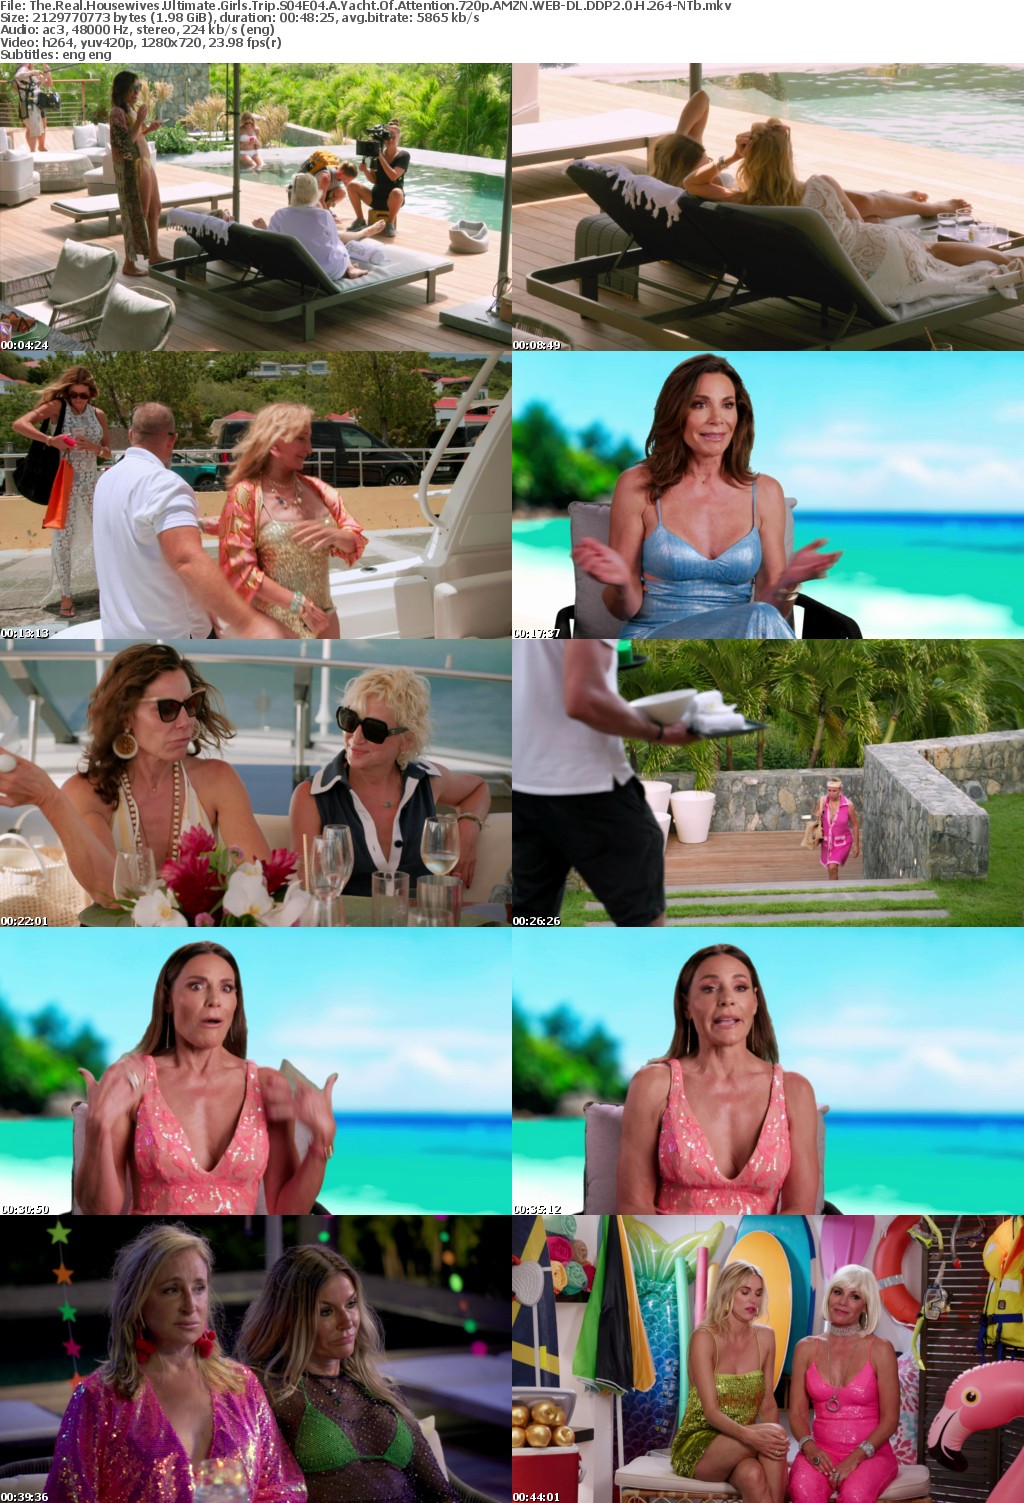 The Real Housewives Ultimate Girls Trip S04E04 A Yacht Of Attention 720p AMZN WEB-DL DDP2 0 H 264-NTb